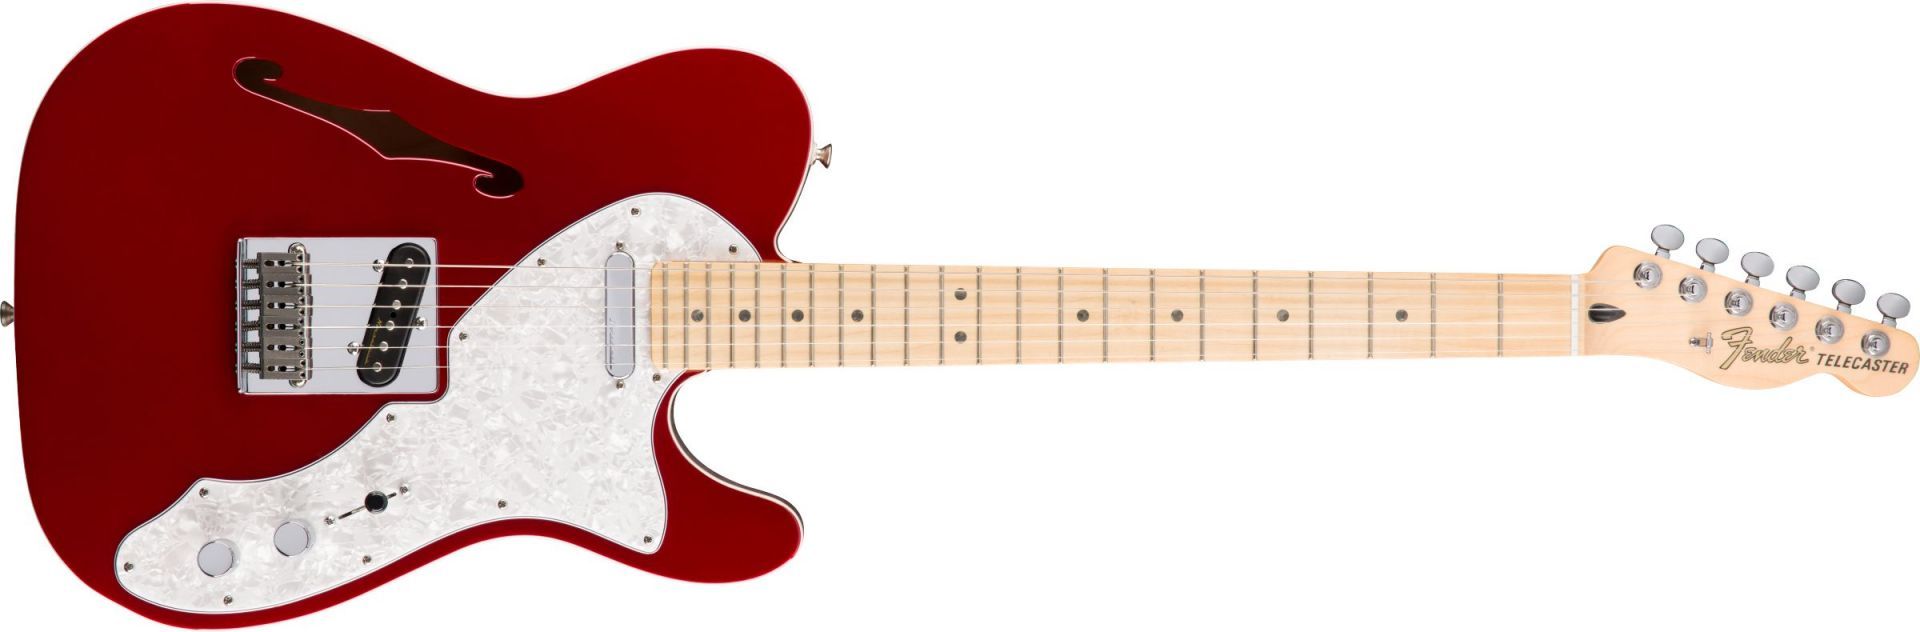 Fender Deluxe Tele Thinline Candy Apple Red